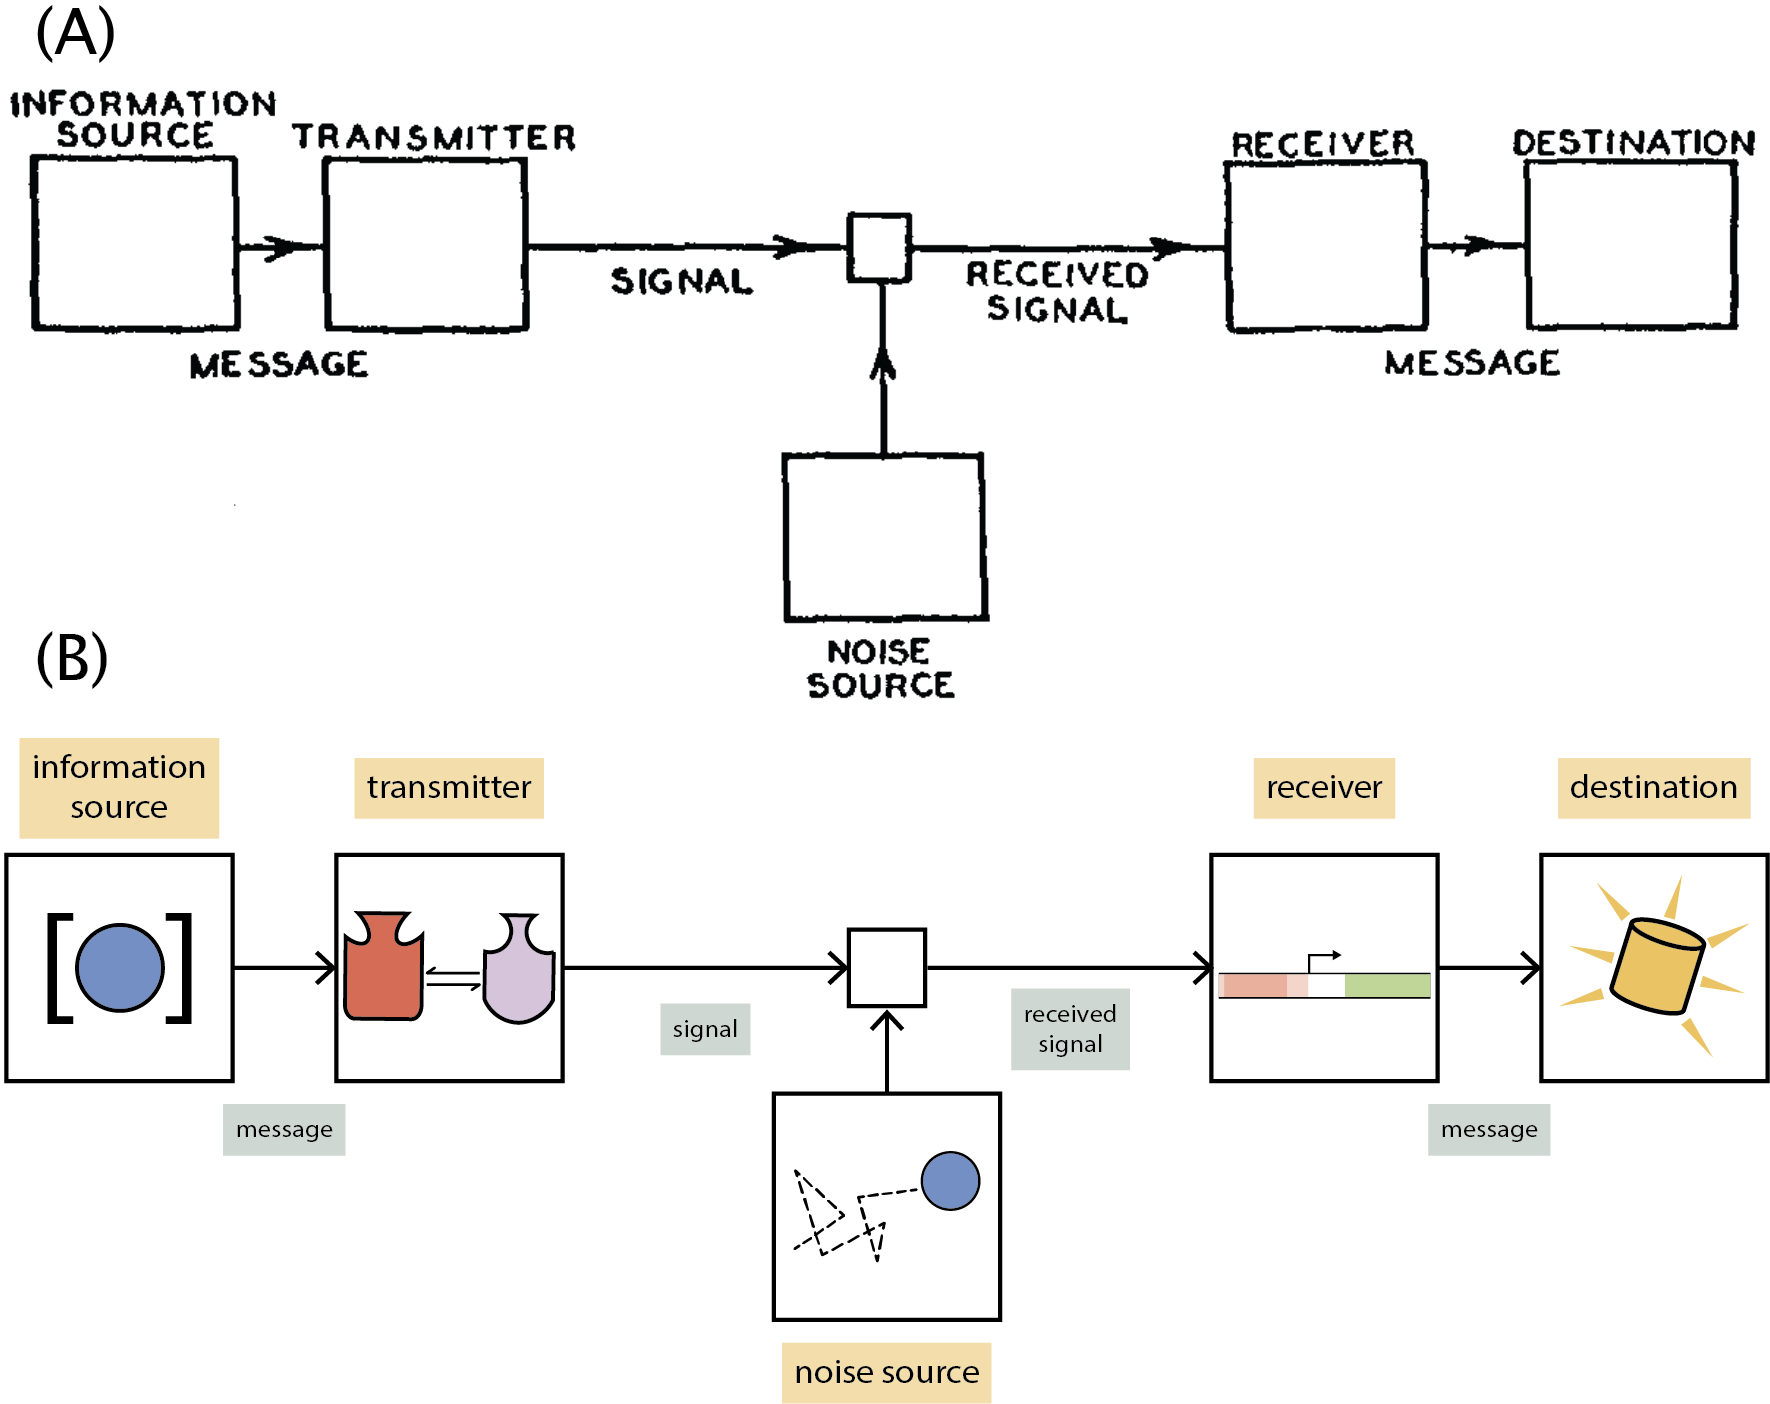 Figure 7: Abstract communication system. (A) Reproduced from Shannon’s original seminal work  [27]. The schematic shows an abstract communication system with all the components. (B) Adaptation of the Shannon communication system to the context of bacterial gene expression regulated by an allosteric transcription factor.